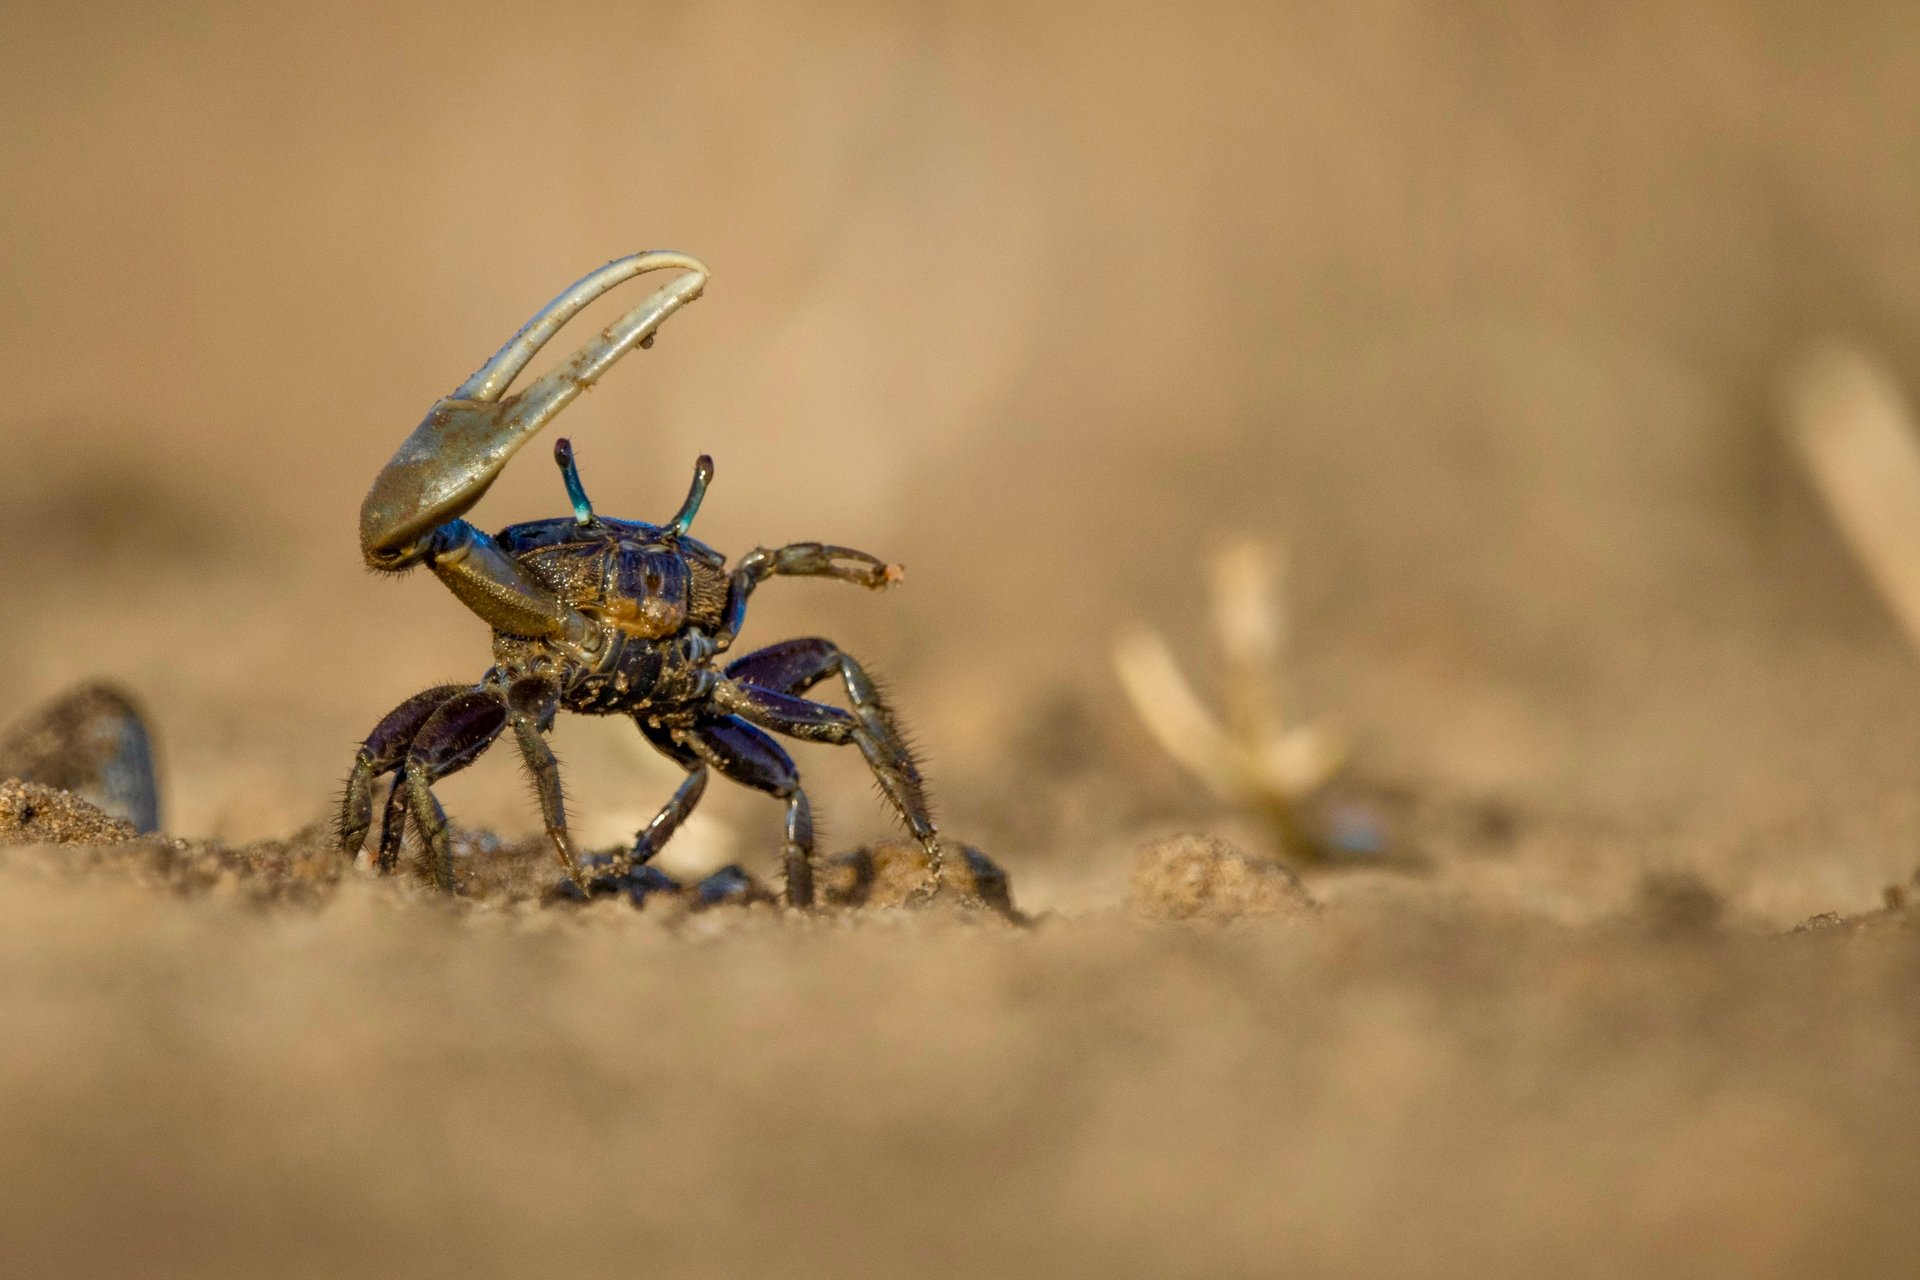 up close of a fiddler crab with claw in air